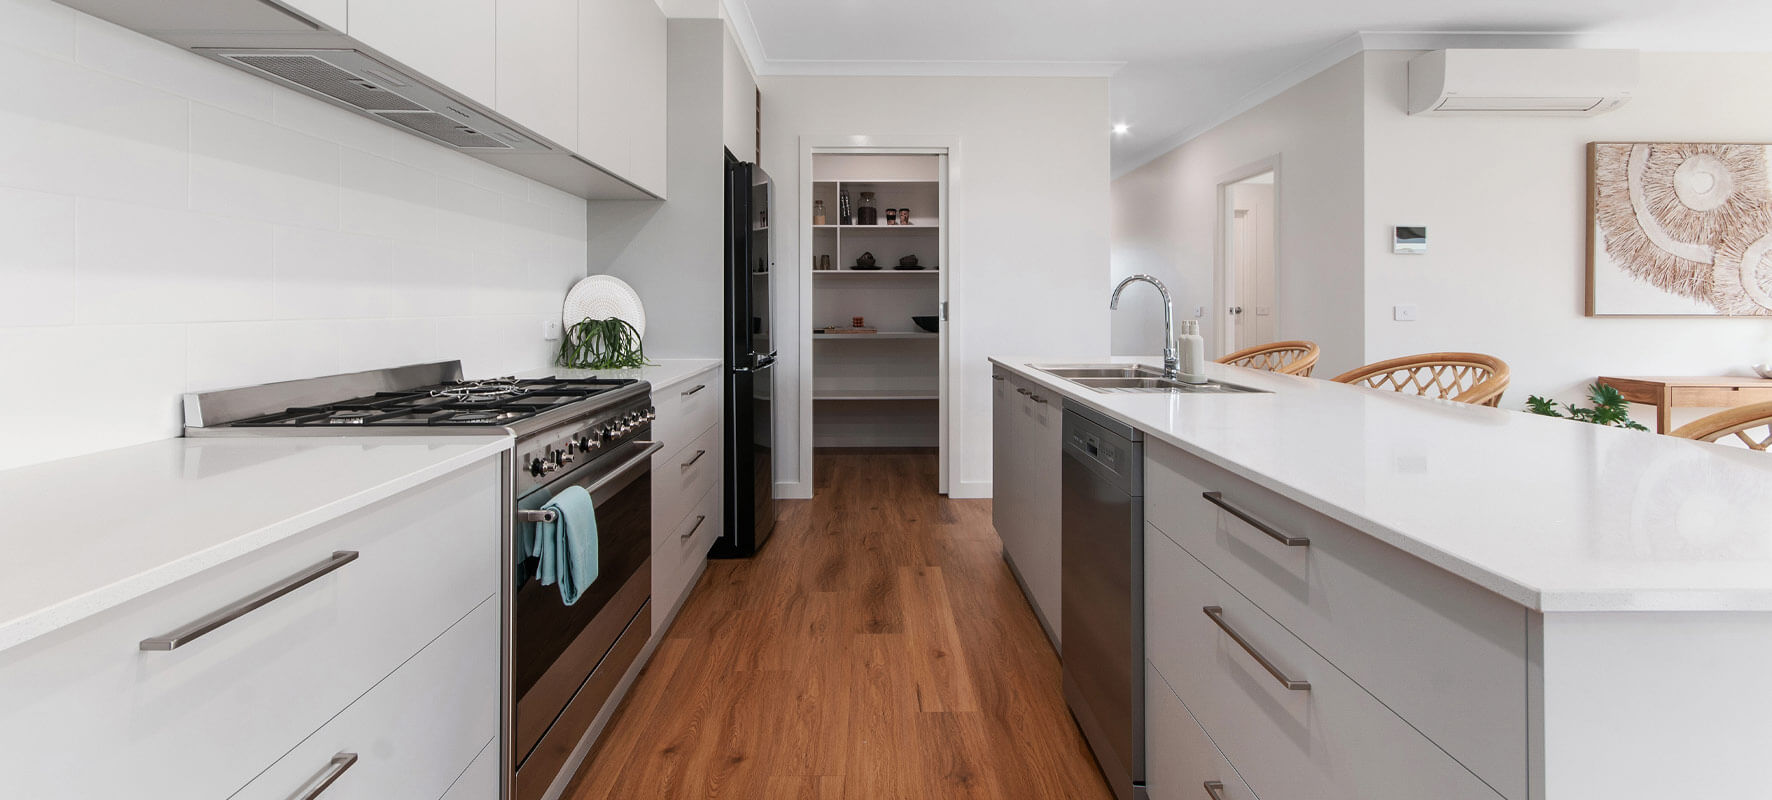 Photo of white kitchen with timber floor